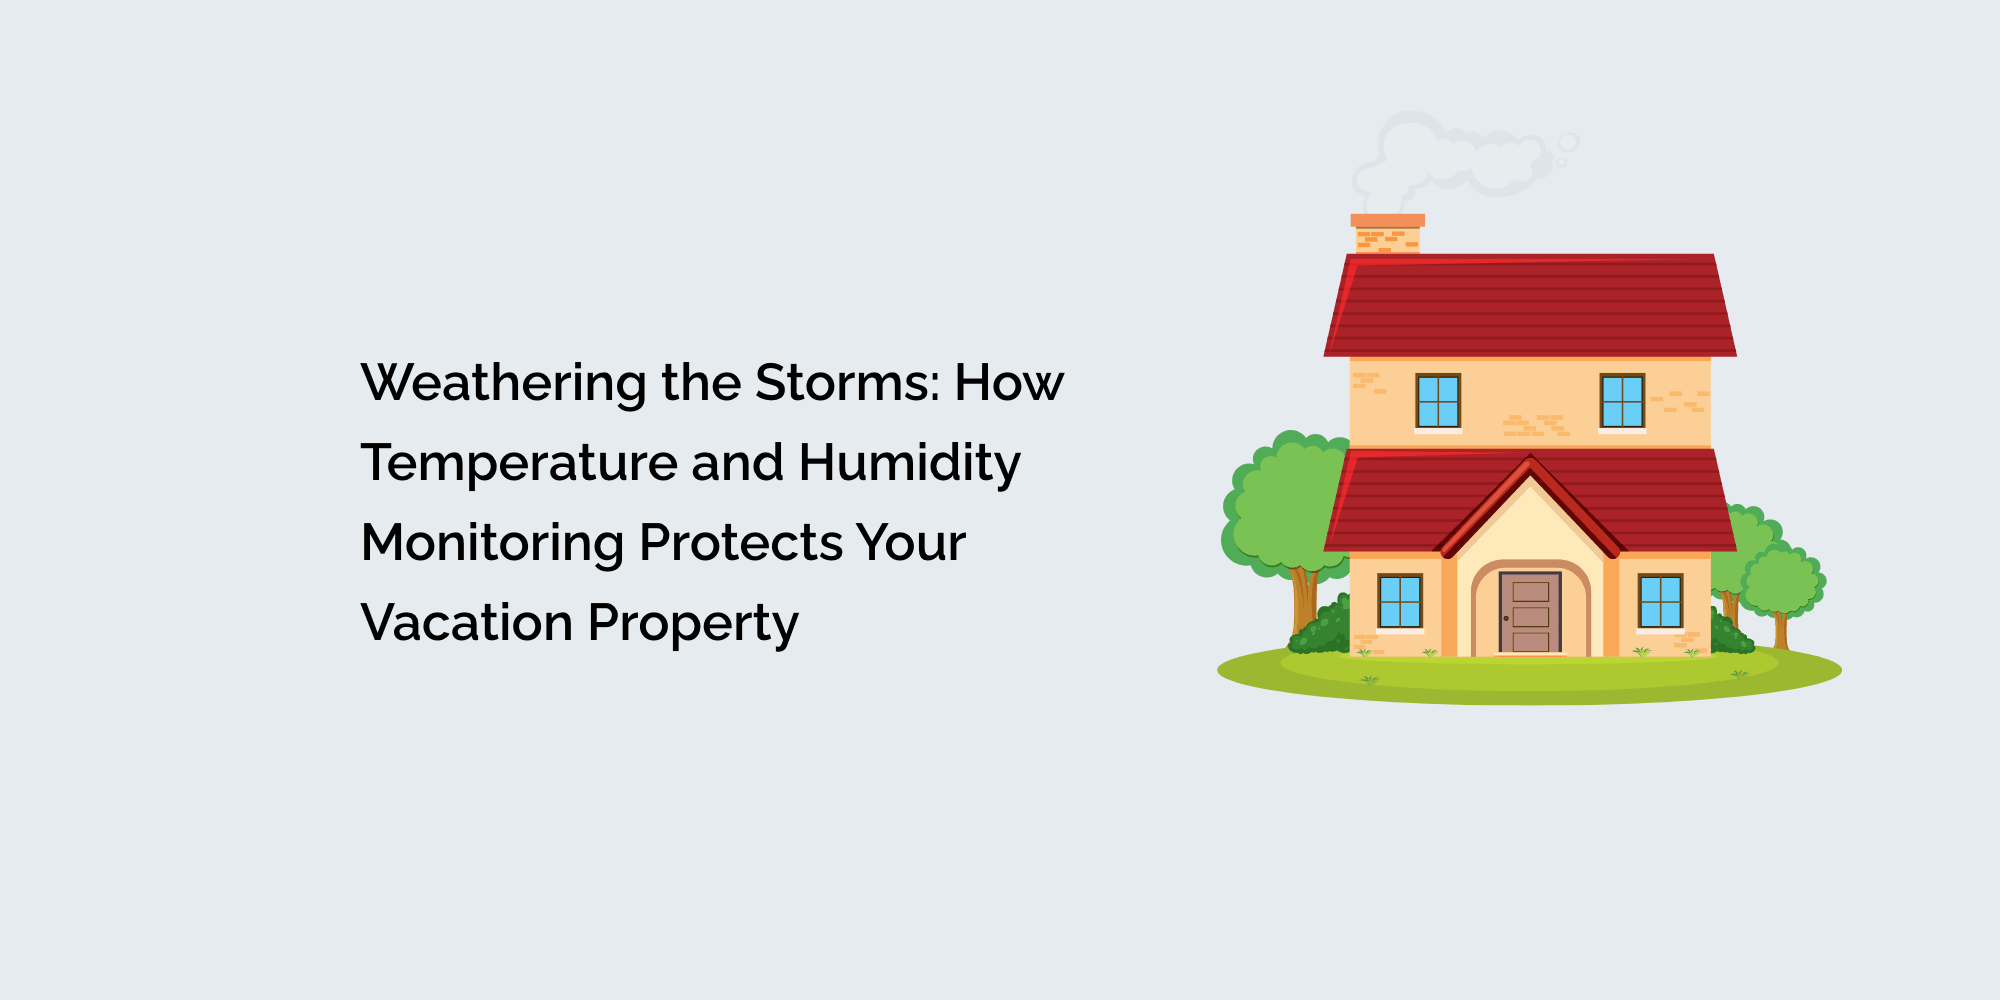 Weathering the Storms: How Temperature and Humidity Monitoring Protects Your Vacation Property